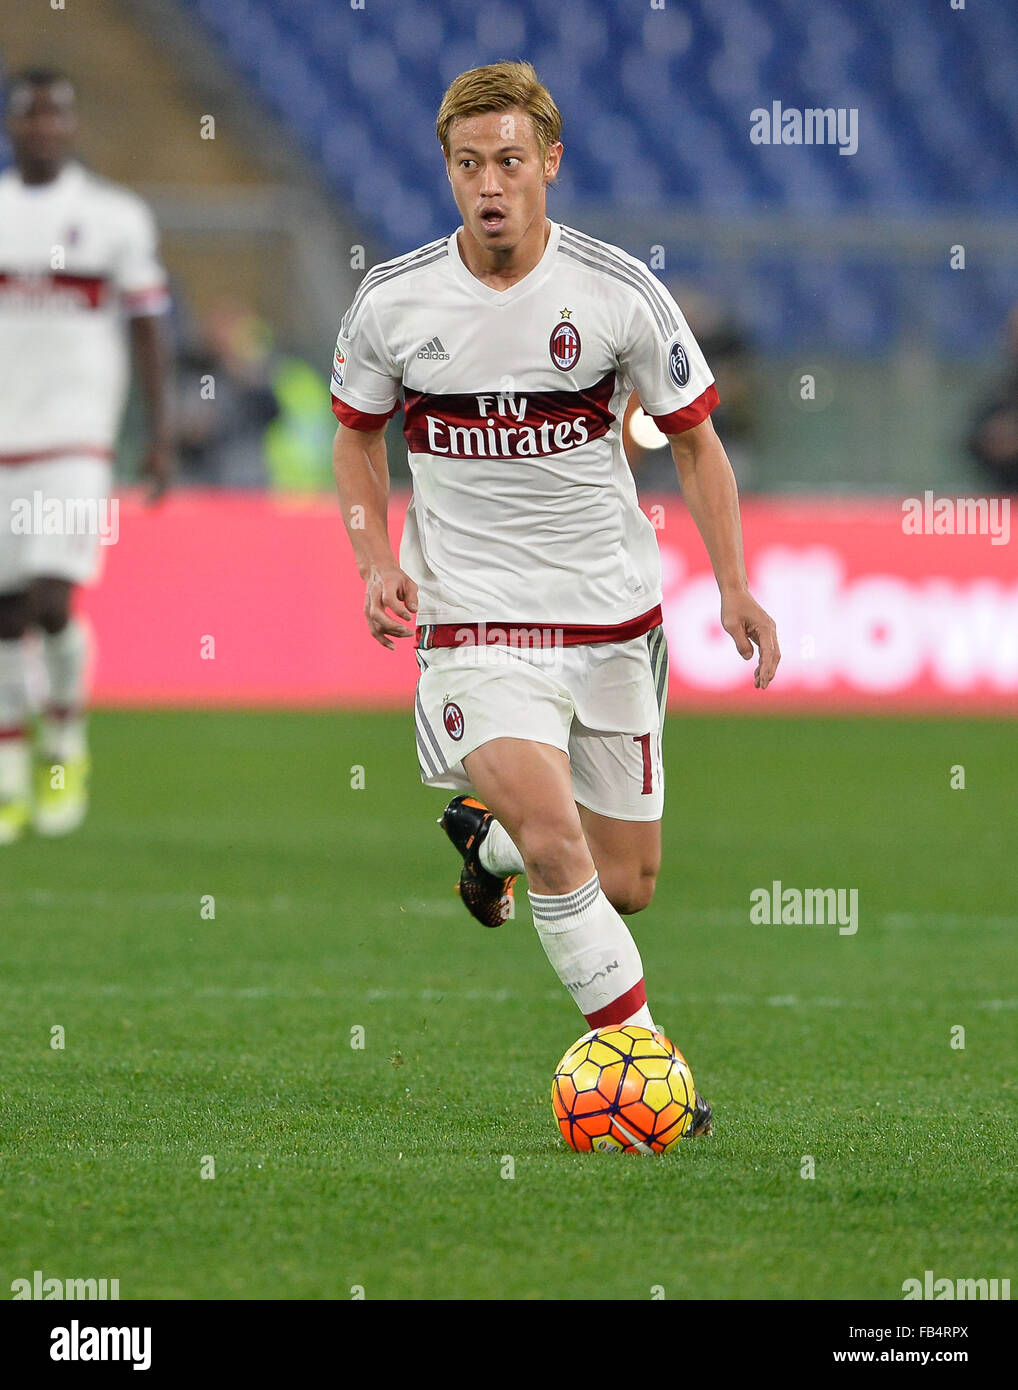 Rome, Italy. 09th Jan, 2016. Keisuke Honda during the Italian Serie A football match A.S. Roma vs A.C. Milan at the Olympic Stadium in Rome, on january 09, 2016 Credit:  Silvia Lore'/Alamy Live News Stock Photo